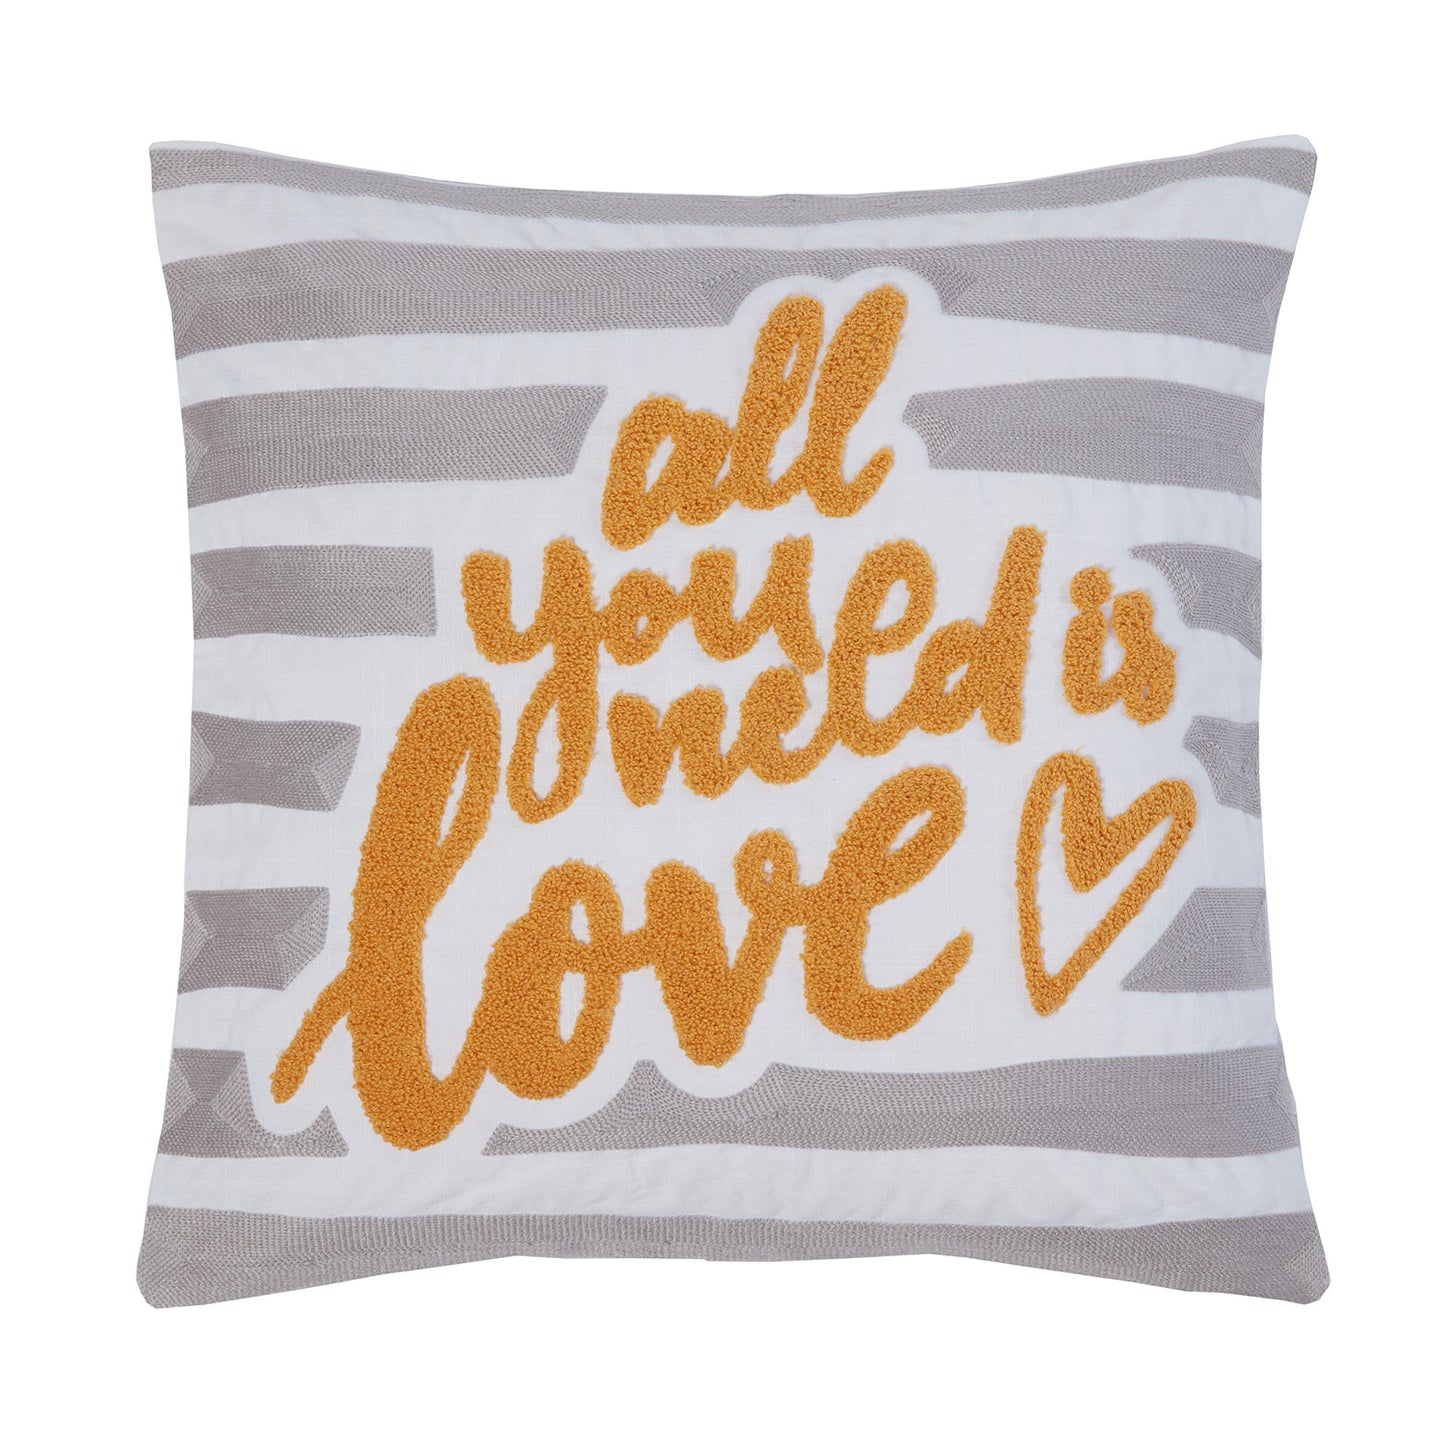 All You Need Is Love Applique Cushion (43cm x 43cm)